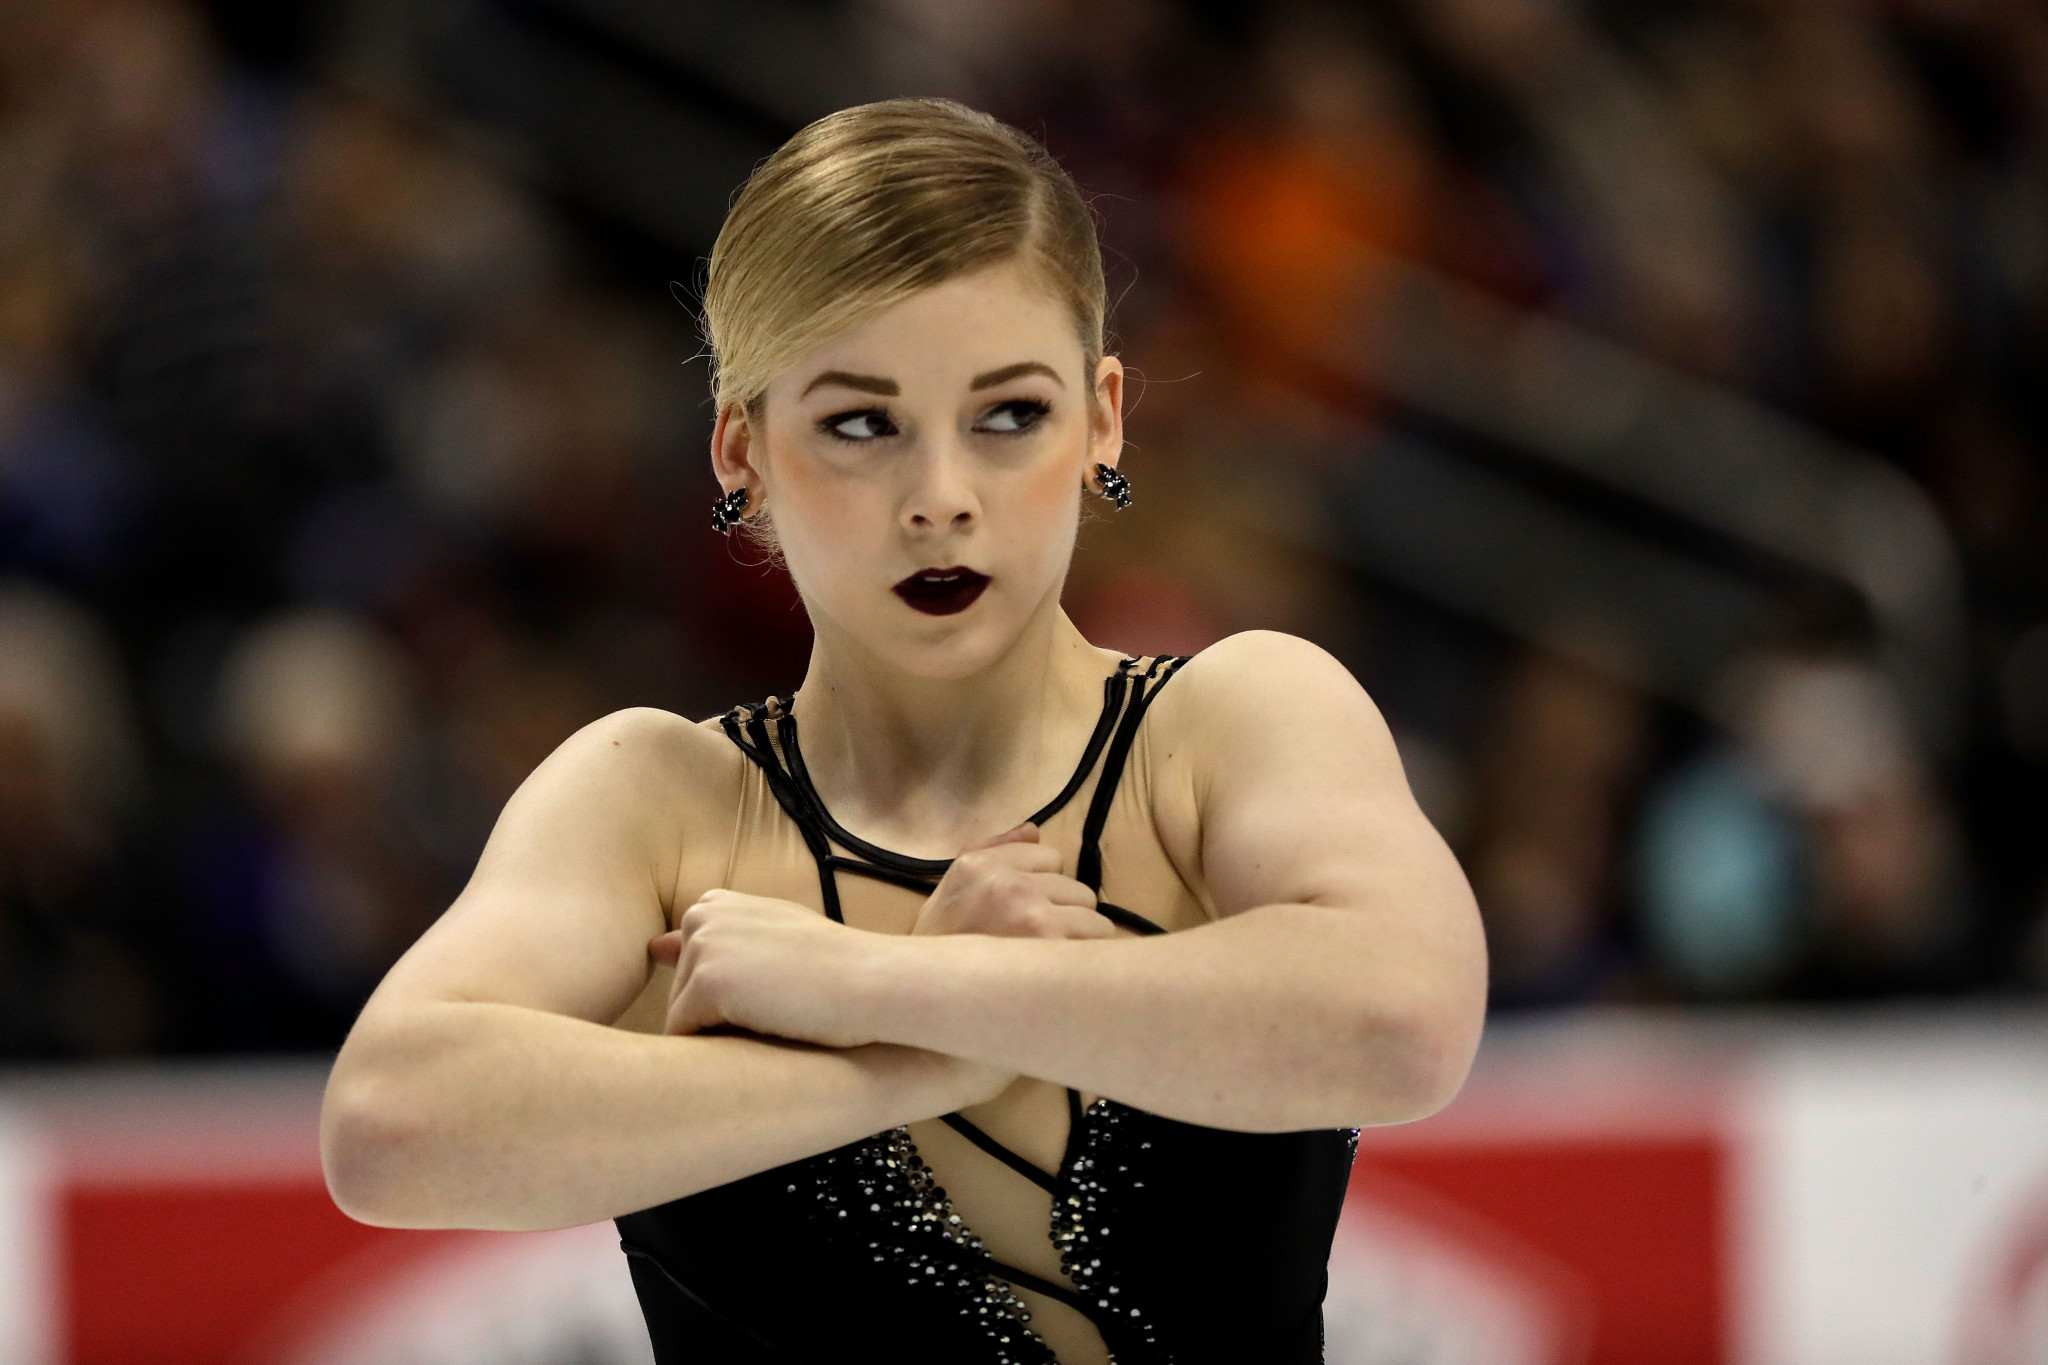 Figure skater Gold receiving treatment for an eating disorder